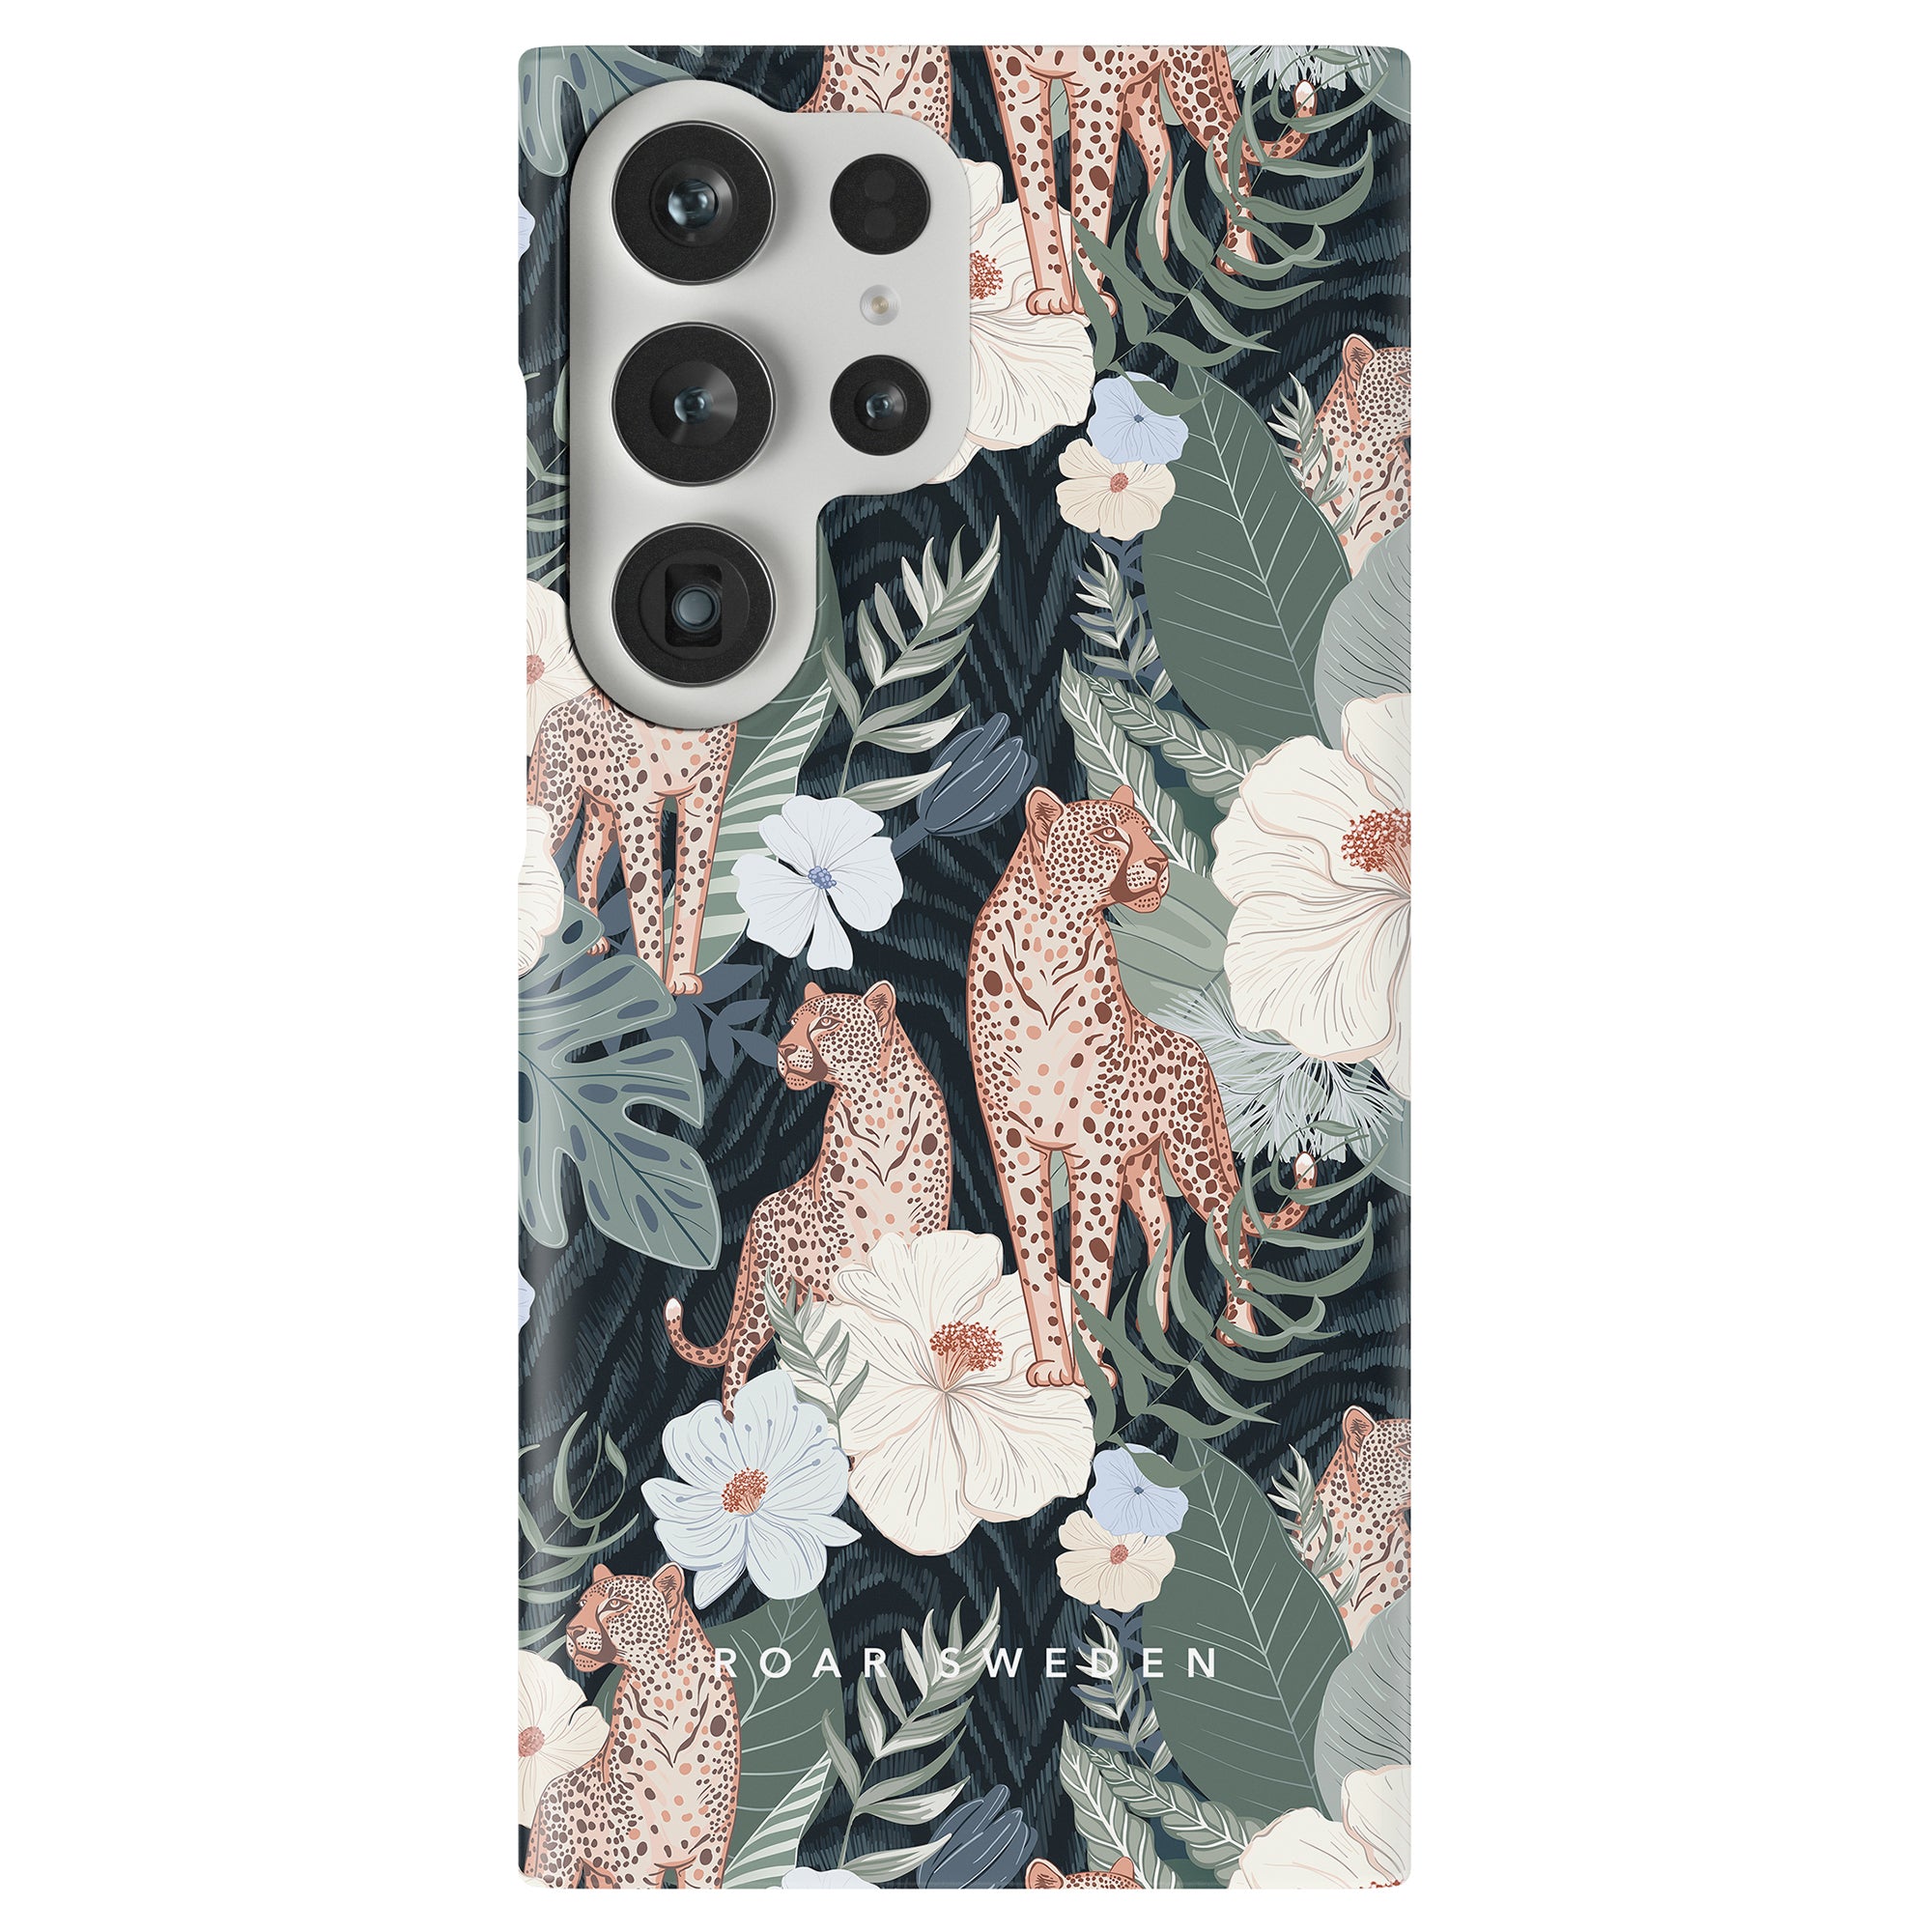 This Leopardess - Slim case combines the fierce elegance of Leopardess with delicate floral patterns.